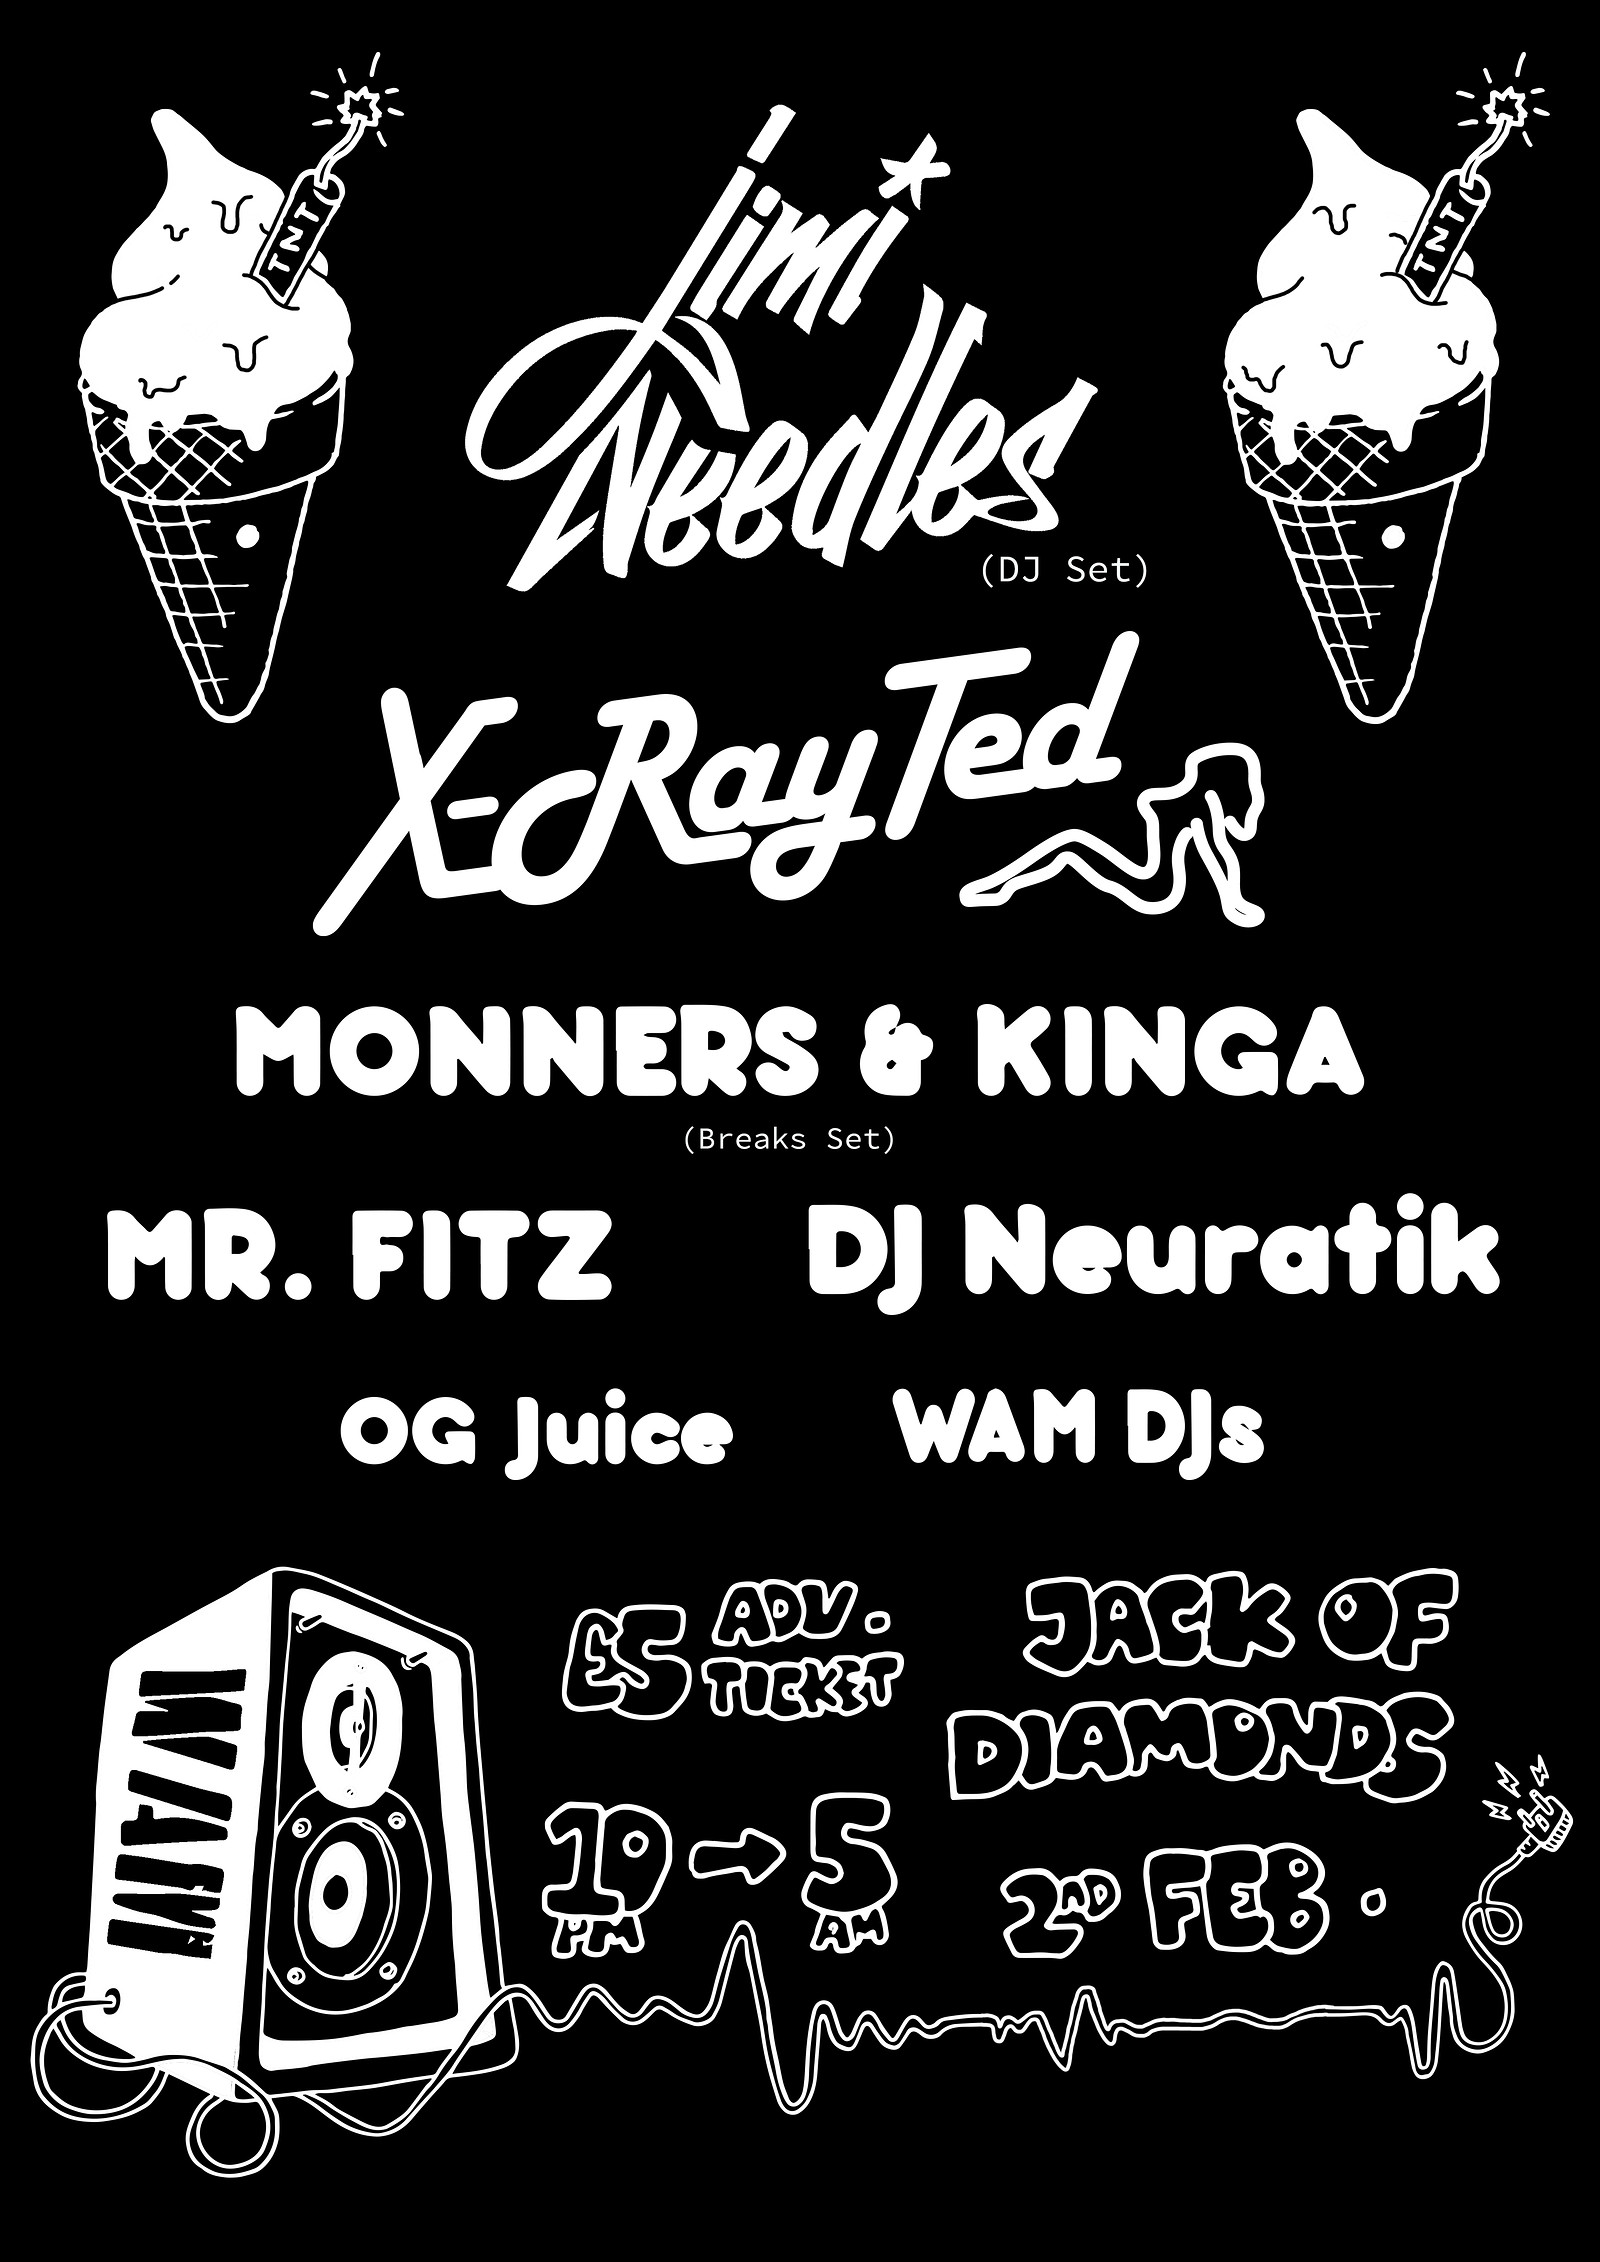 WAM Feat Jimi Needles & X Ray Ted + More at Jack of Diamonds